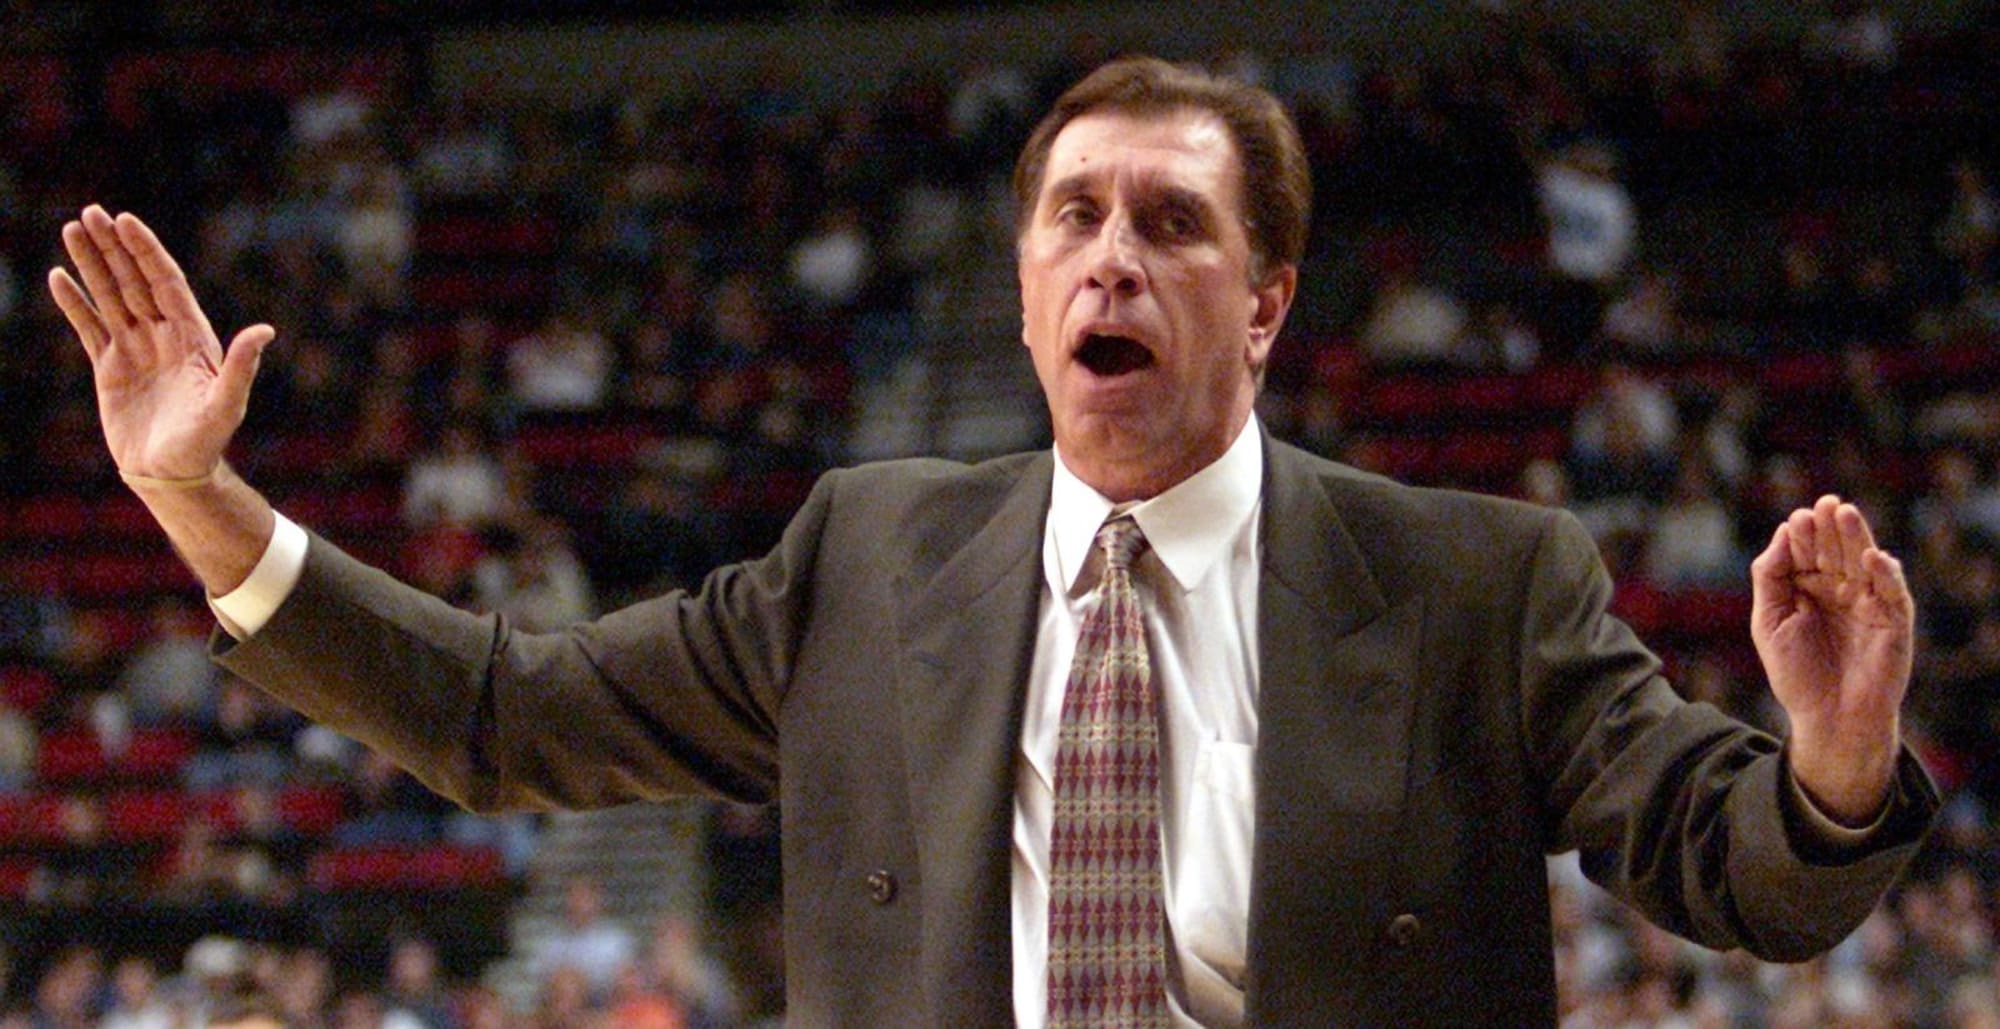 Houston Sports Hall of Fame 2020: For Rudy Tomjanovich, the work